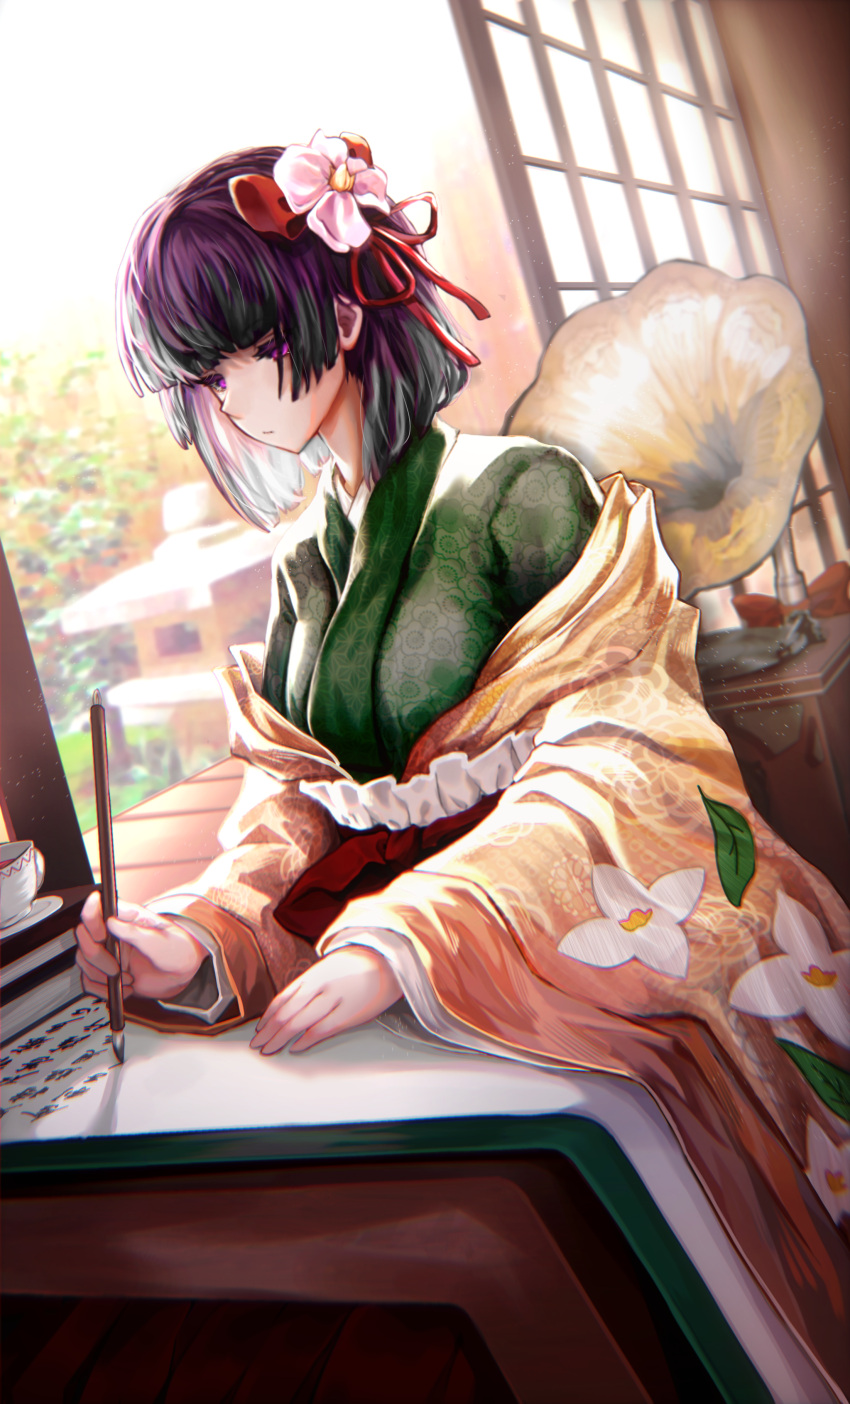 1girl :/ absurdres bangs blunt_bangs book book_stack calligraphy_brush calligraphy_scroll closed_mouth cup flower green_kimono hair_flower hair_ornament hair_ribbon half-closed_eyes hieda_no_akyuu highres holding holding_calligraphy_brush indoors japanese_clothes kimono layered_clothes layered_kimono long_sleeves paintbrush phonograph pink_flower purple_hair red_ribbon ribbon saucer scroll short_hair sliding_doors solo stone_lantern teacup touhou upper_body violet_eyes wide_sleeves writing xiaotianeveryday yellow_kimono